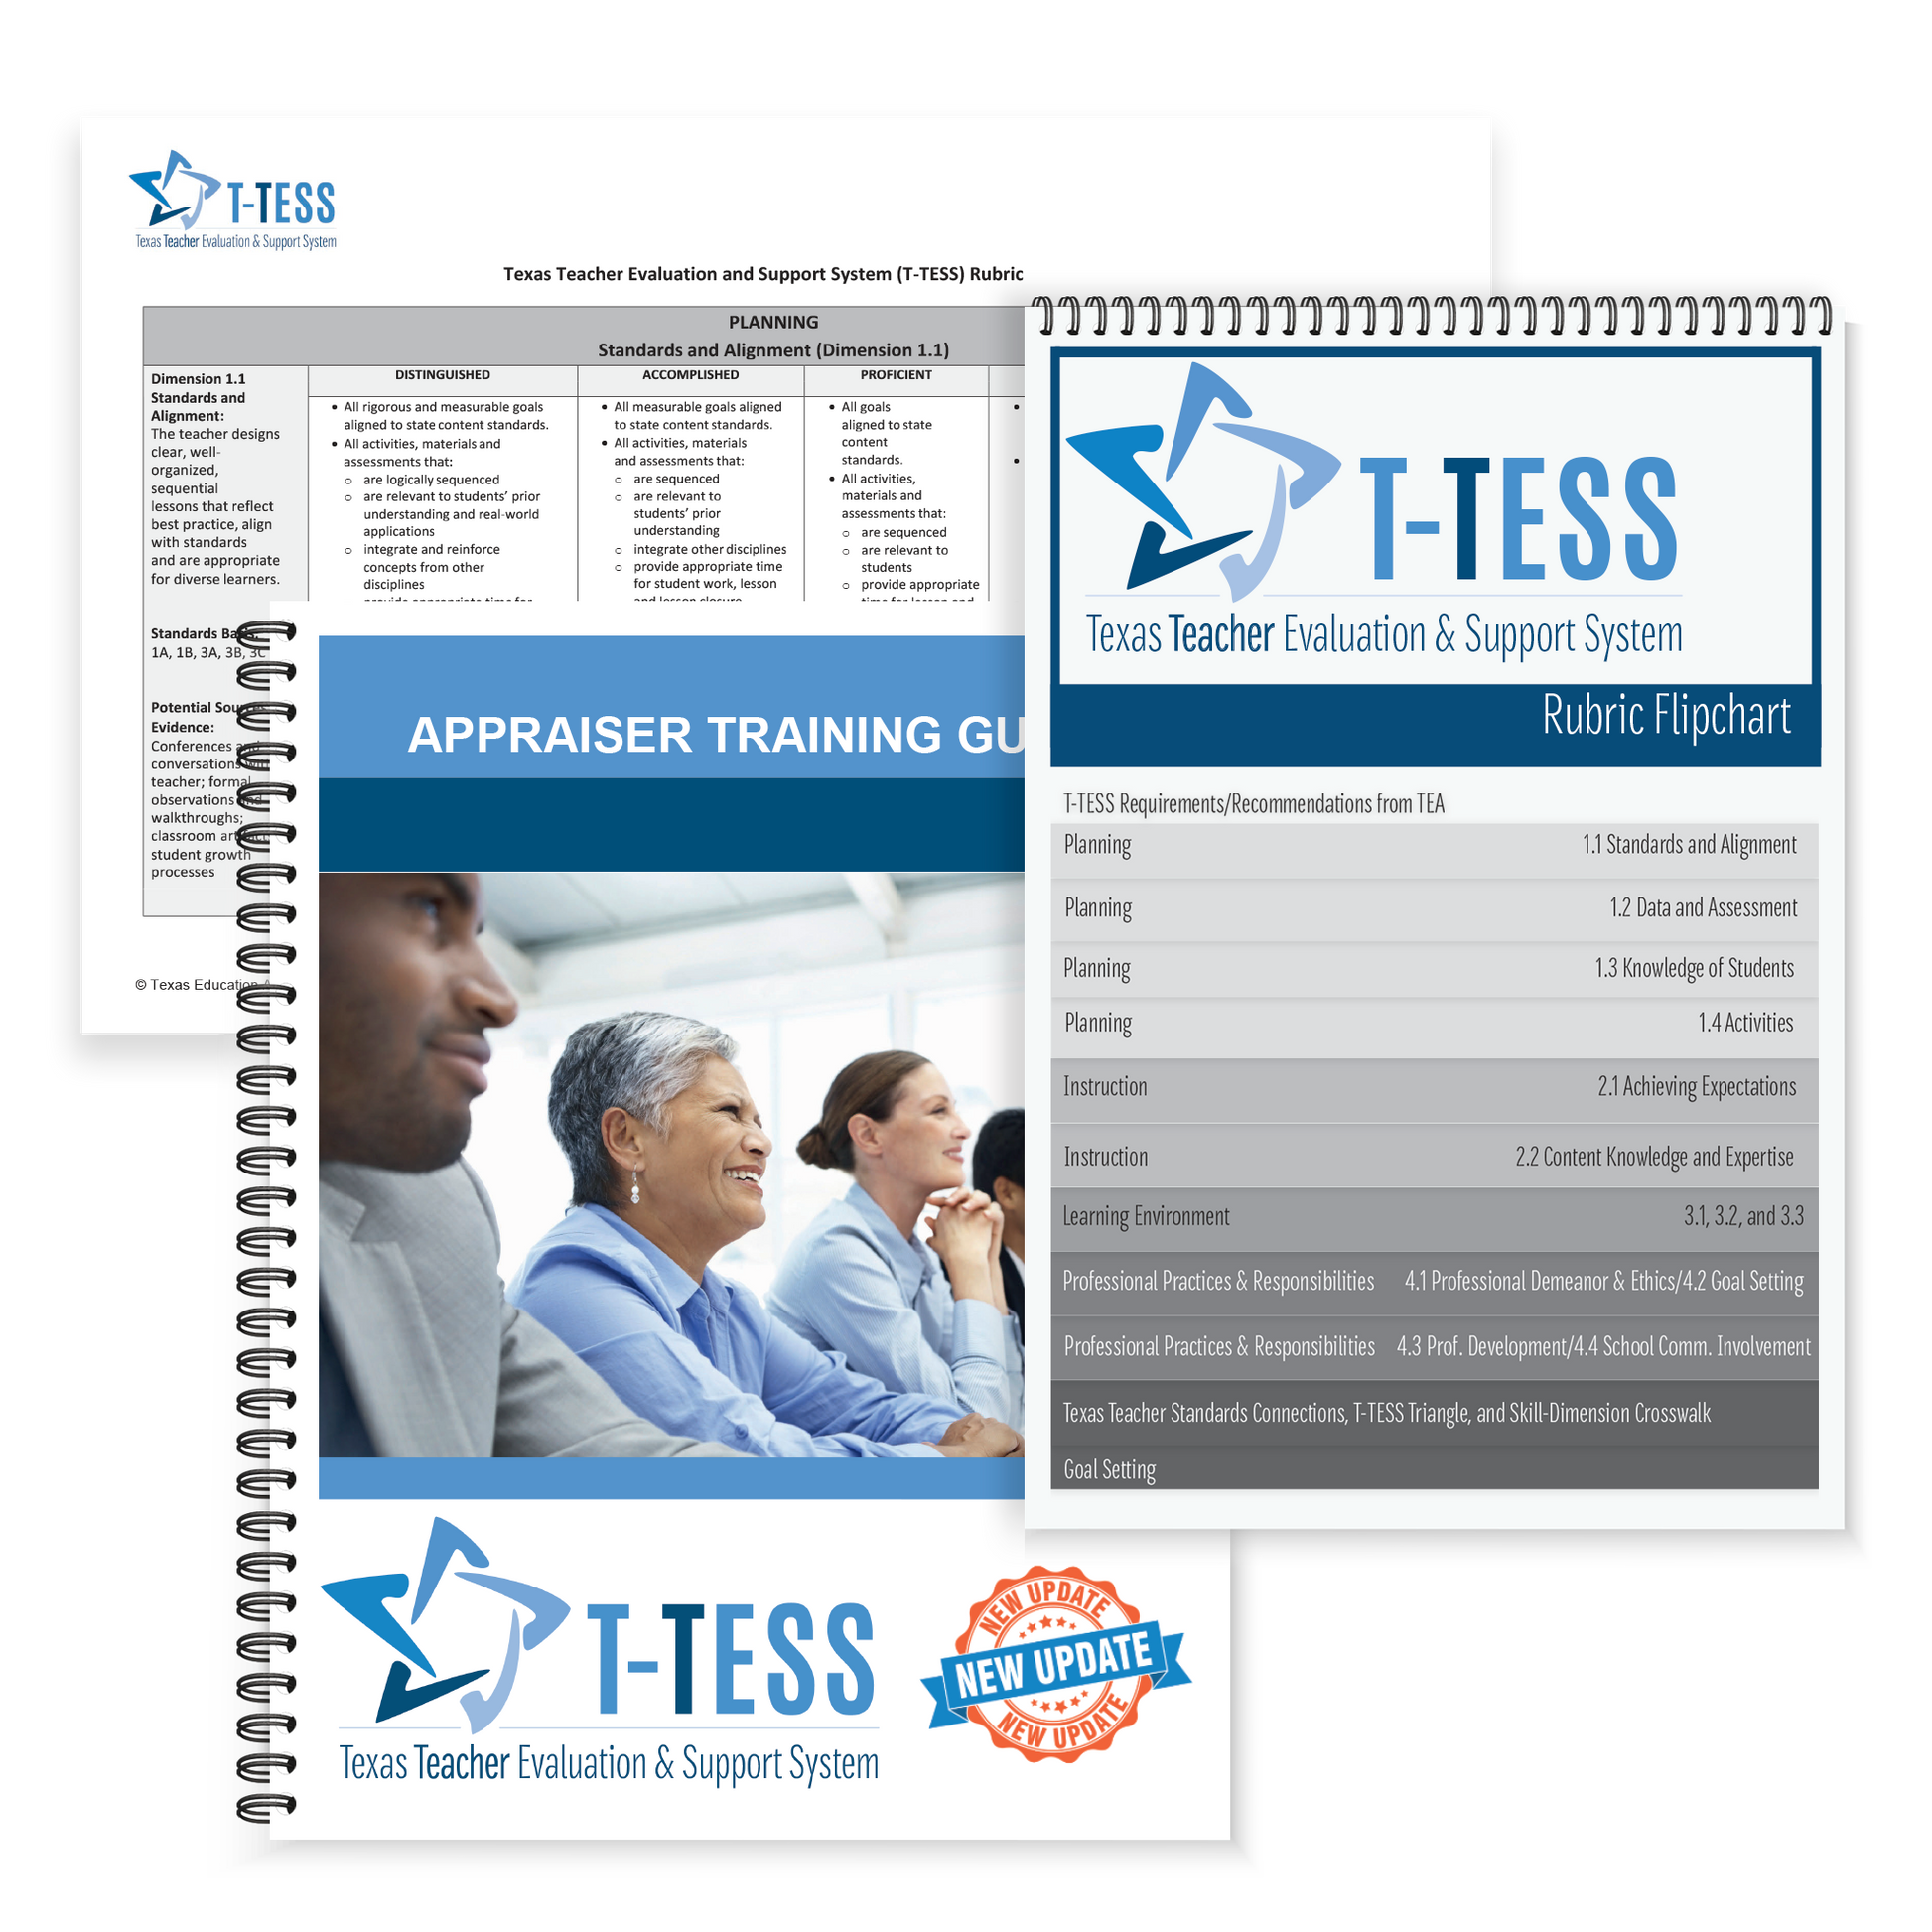 Preview of the blue and gray front pages and covers for three prodcuts included in the Region 13 T-TESS Appraiser Training Guide, T-TESS Rubric, and T-TESS Rubric Flipchart. 